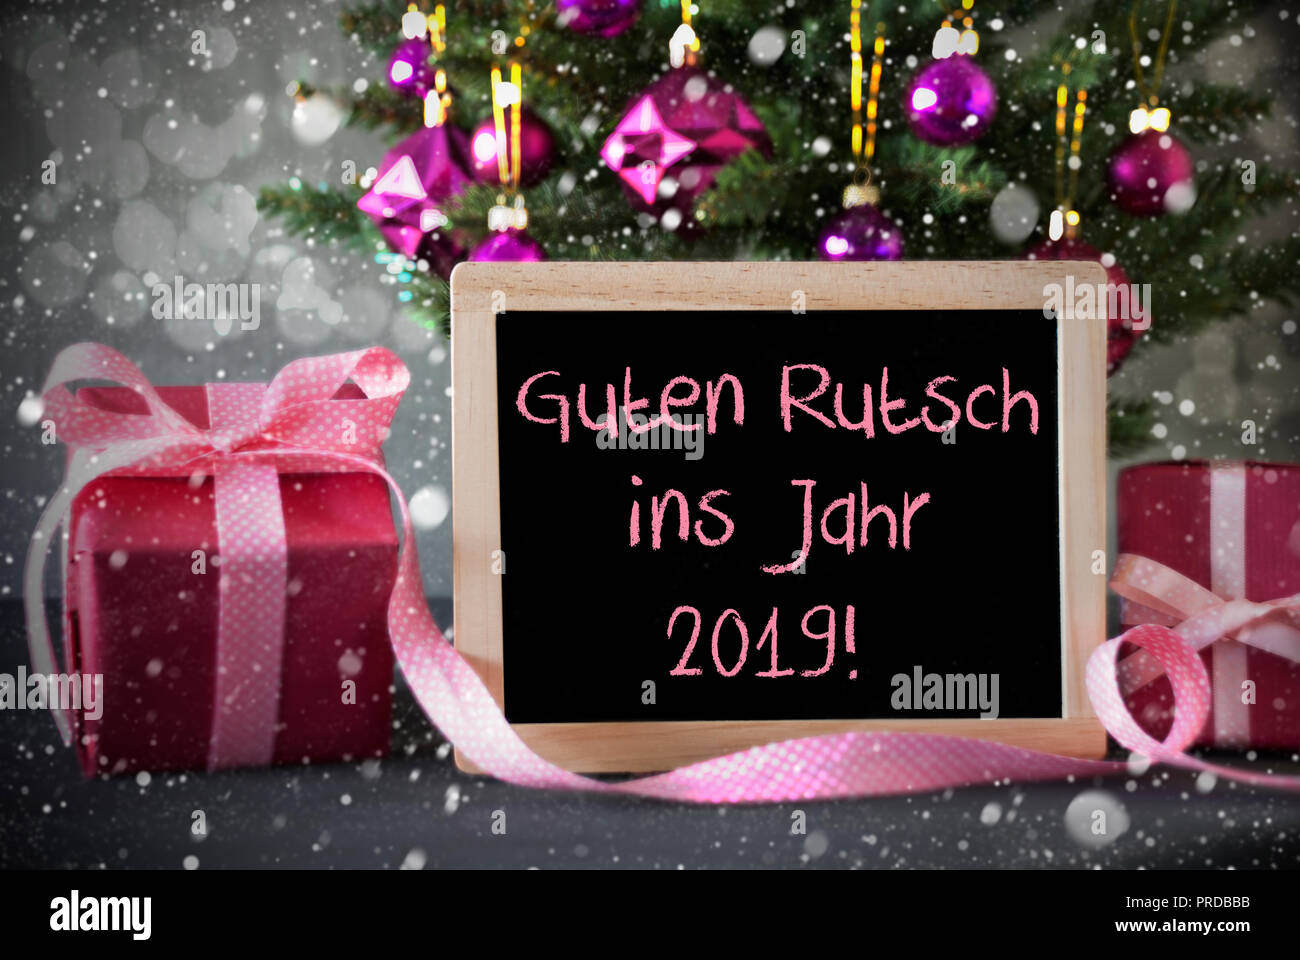 Tree, Gifts, Snowflakes, Bokeh, Guten Rutsch 2019 Means New Year Stock Photo